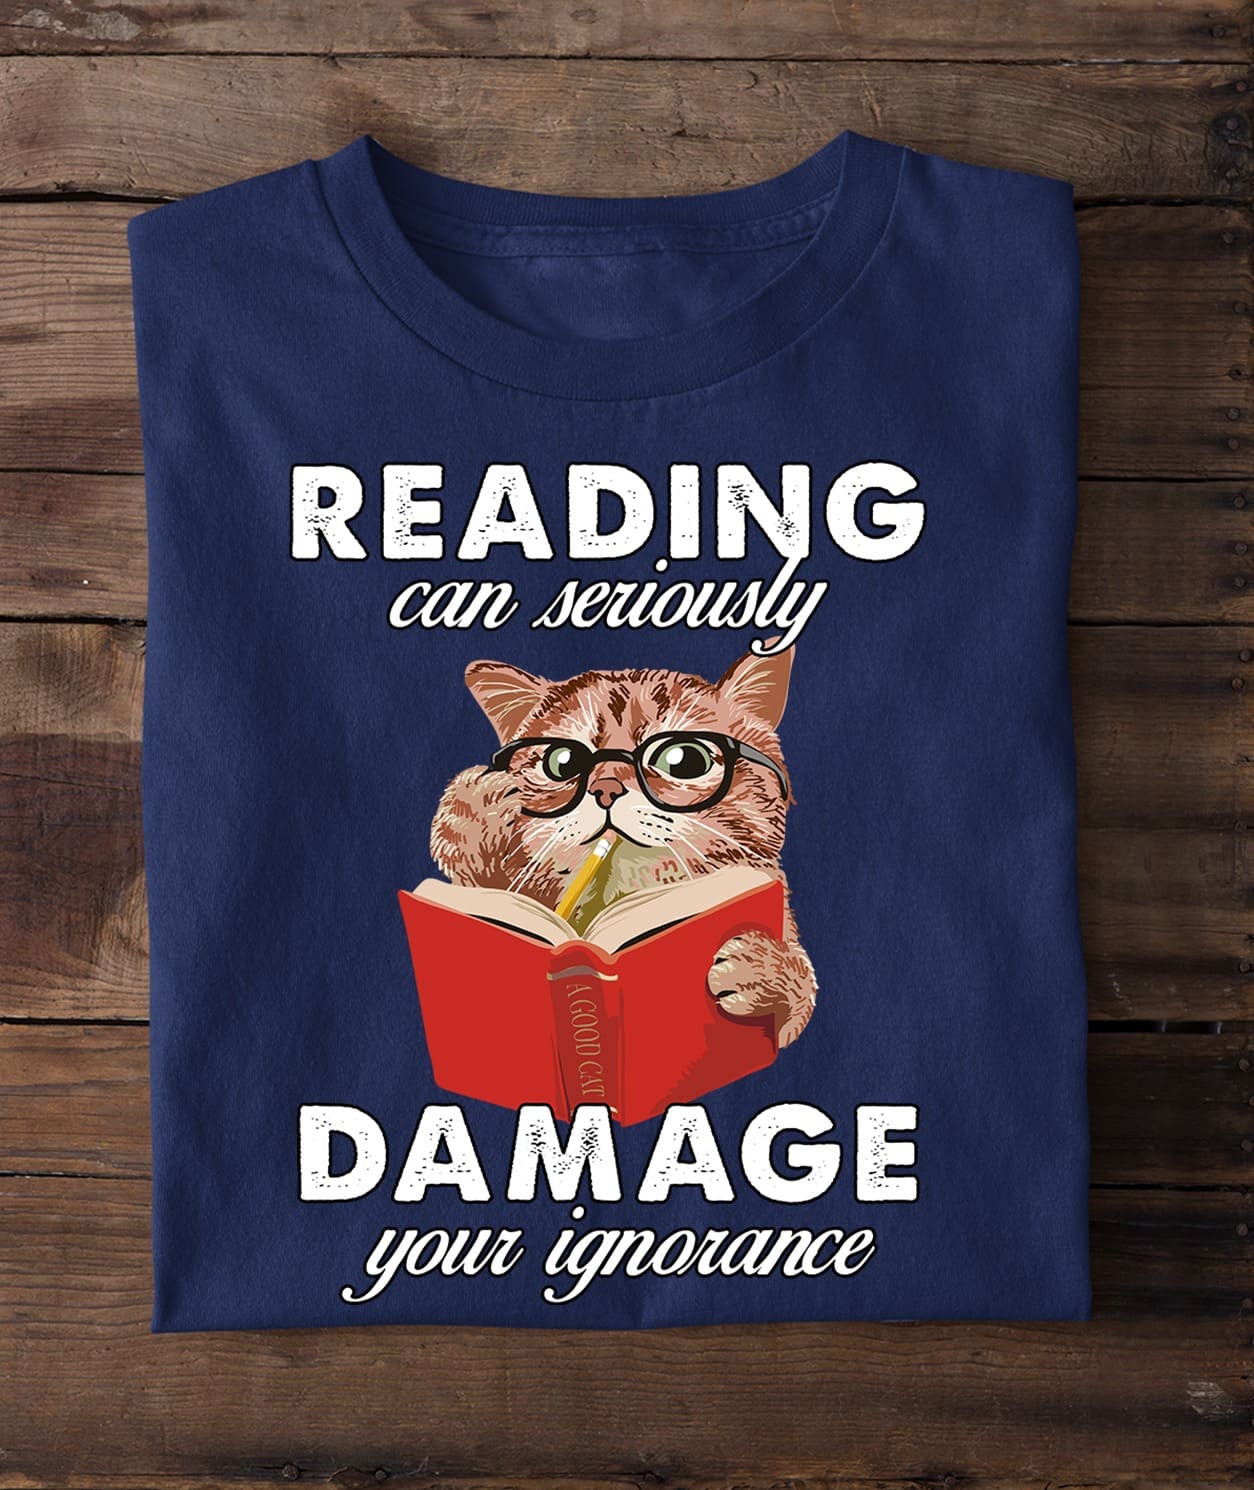 Reading can seriously damage your ignorance - Kitty cat reading book, gift for bookaholic